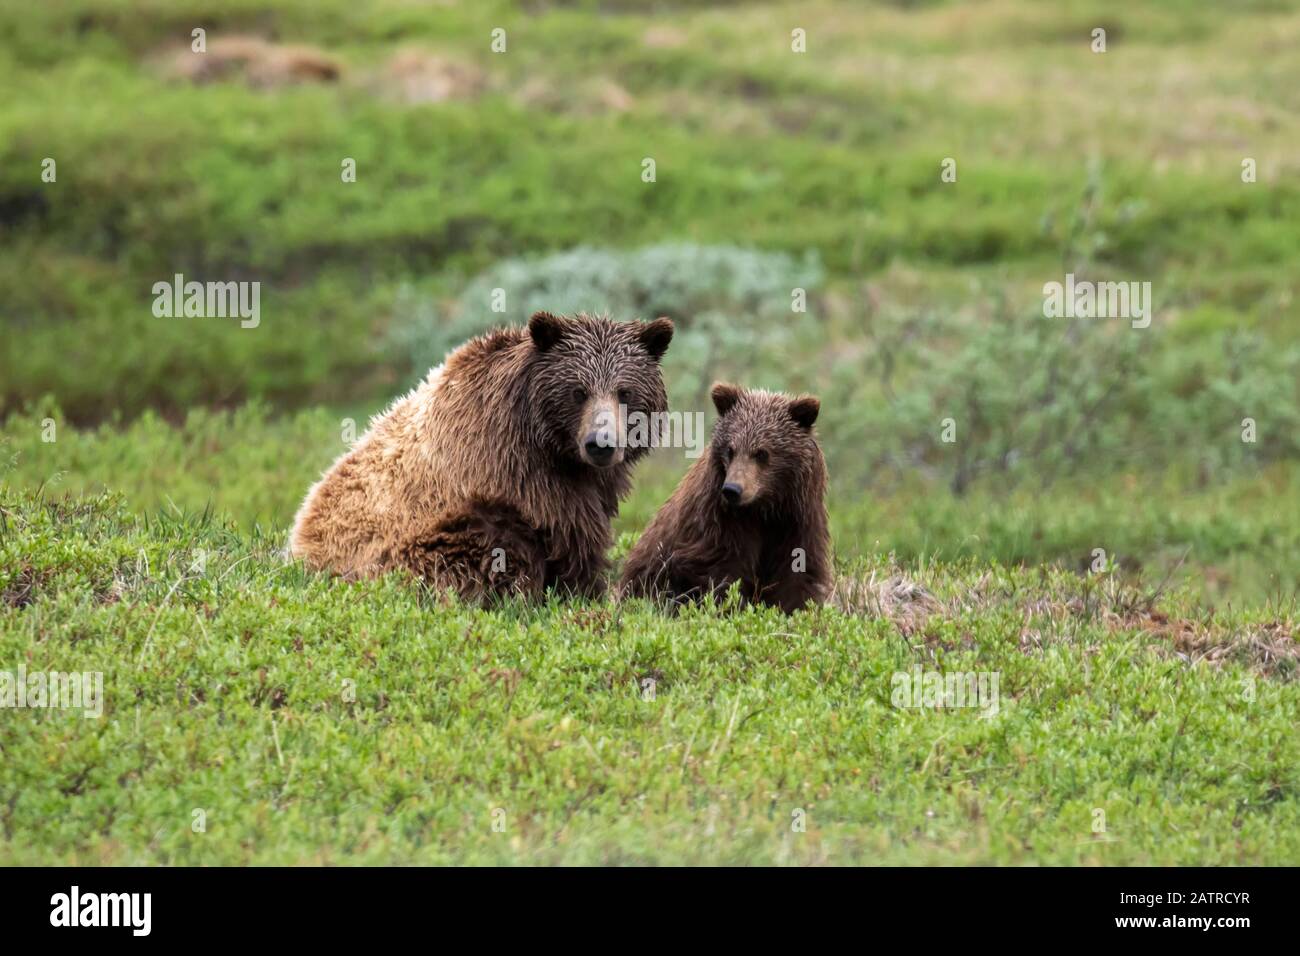 Grizzly bear (Ursus arctos horribilis) sow and cub on tundra, Denali National Park and Preserve; Alaska, United States of America Stock Photo